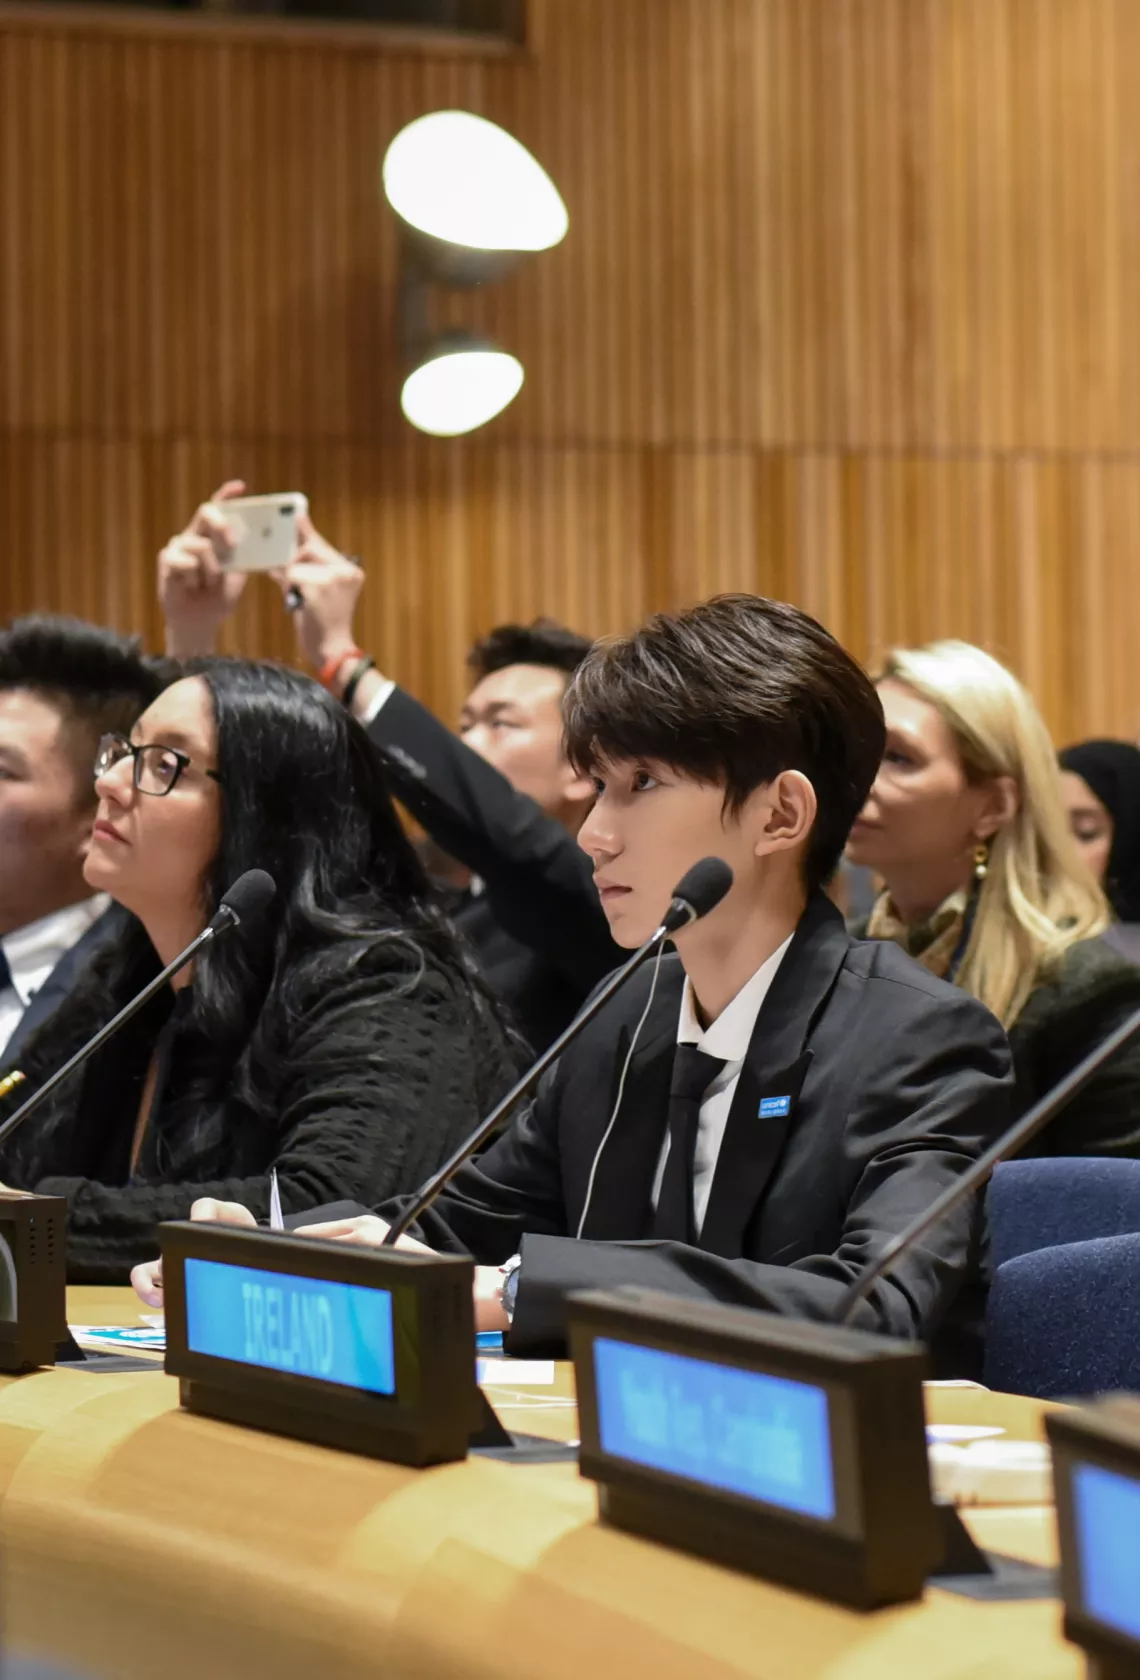 UNICEF Special Advocate for Education Wang Yuan attends the 7th Economic and Social Council (ECOSOC) Youth Forum in New York on 30 January, 2018.